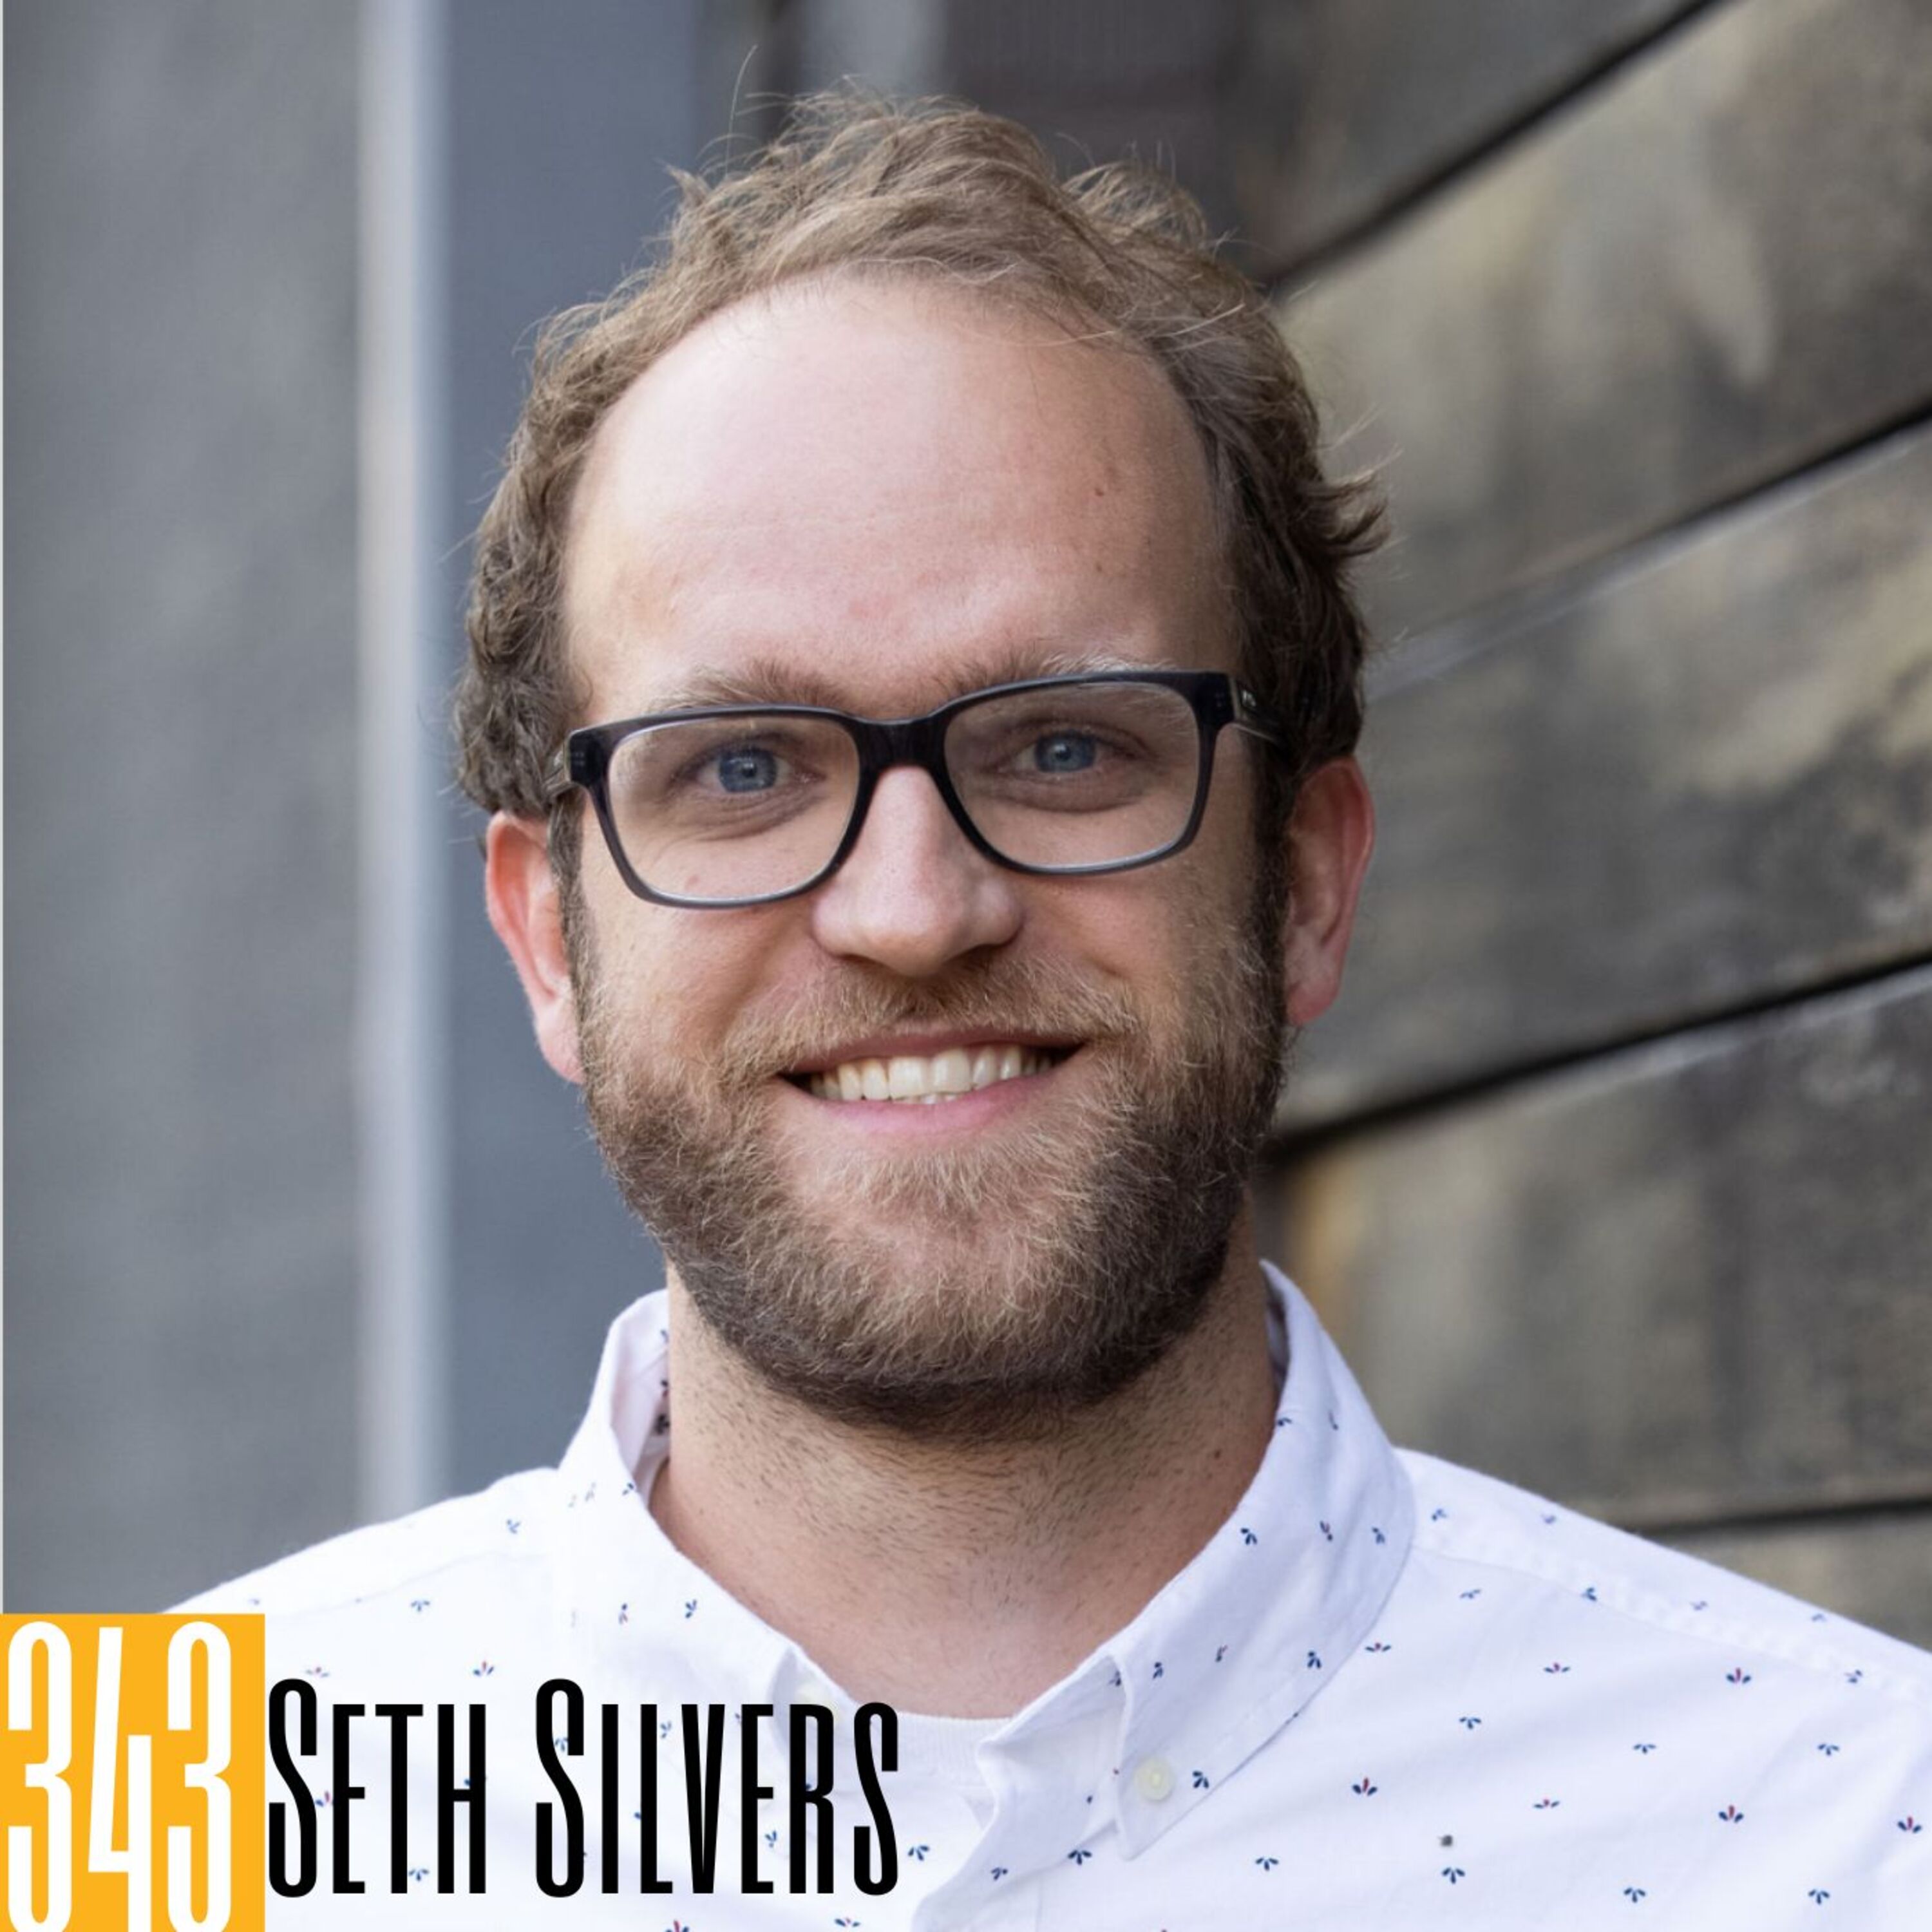 343 Seth Silvers - The Intersection of Business, Storytelling, and Podcasting